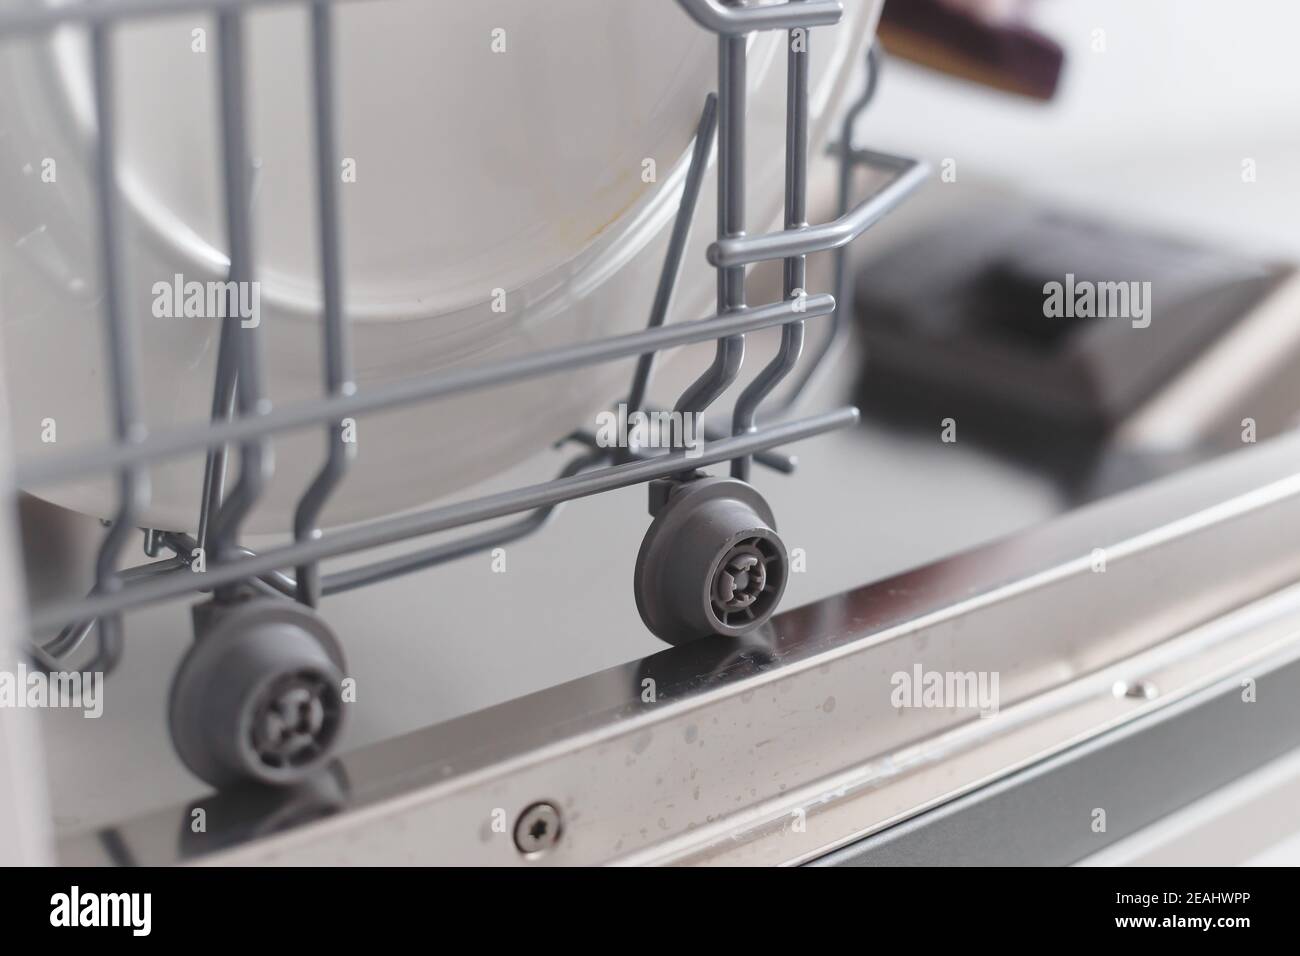 Close-up view of extendable shelf on wheels in the dishwasher. Stock Photo